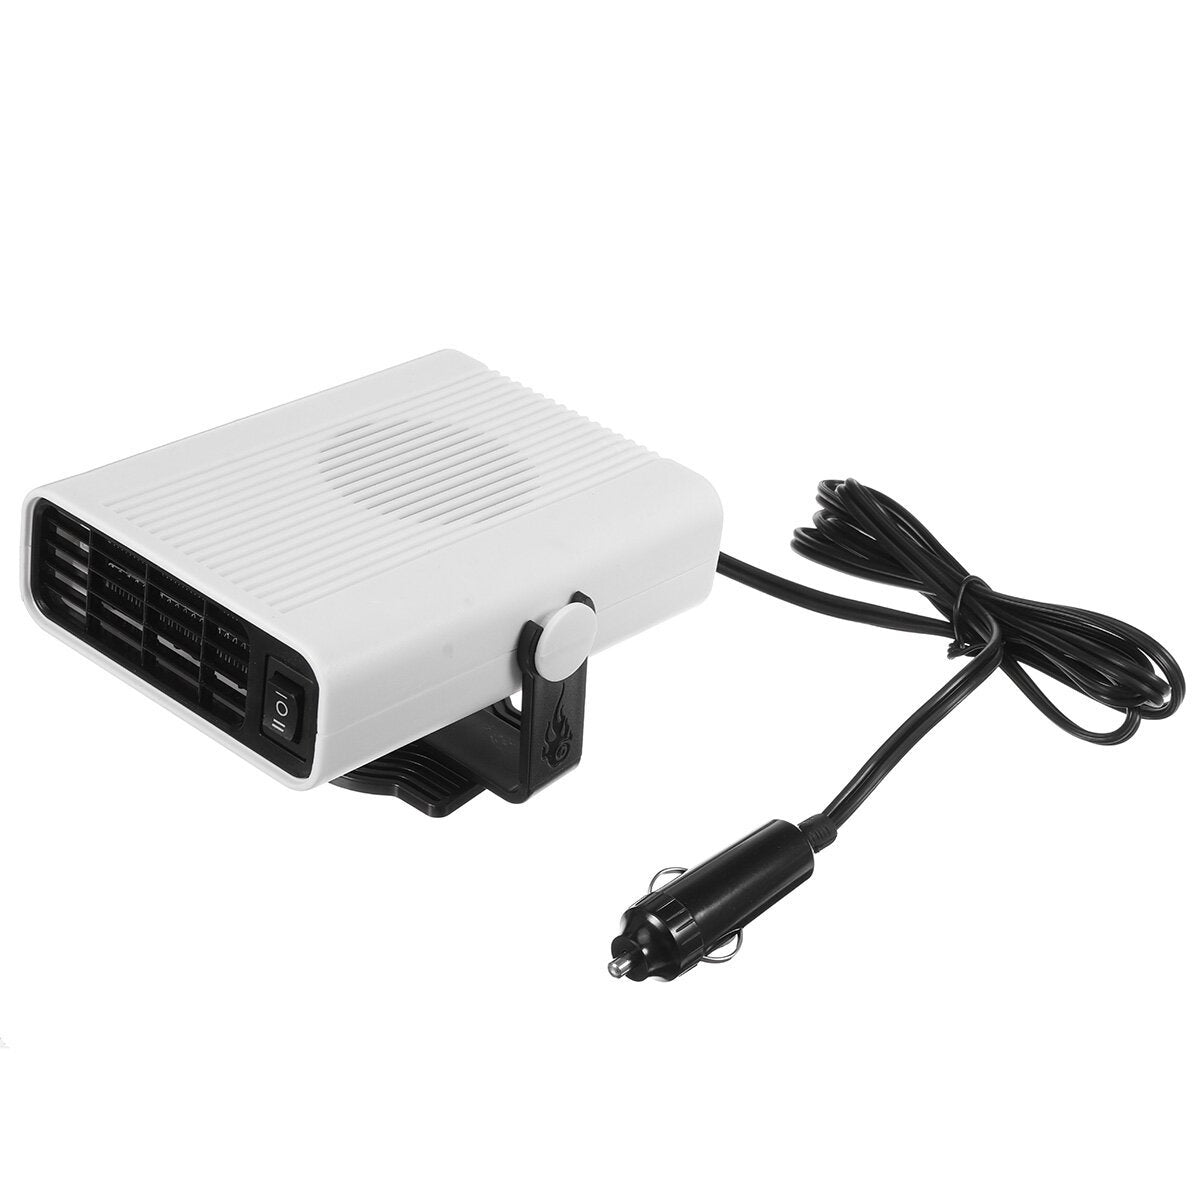 400W Car Portable Electric Heater 2 Modes Wind Heating Cooling Fan Defroster Demister Low Noise